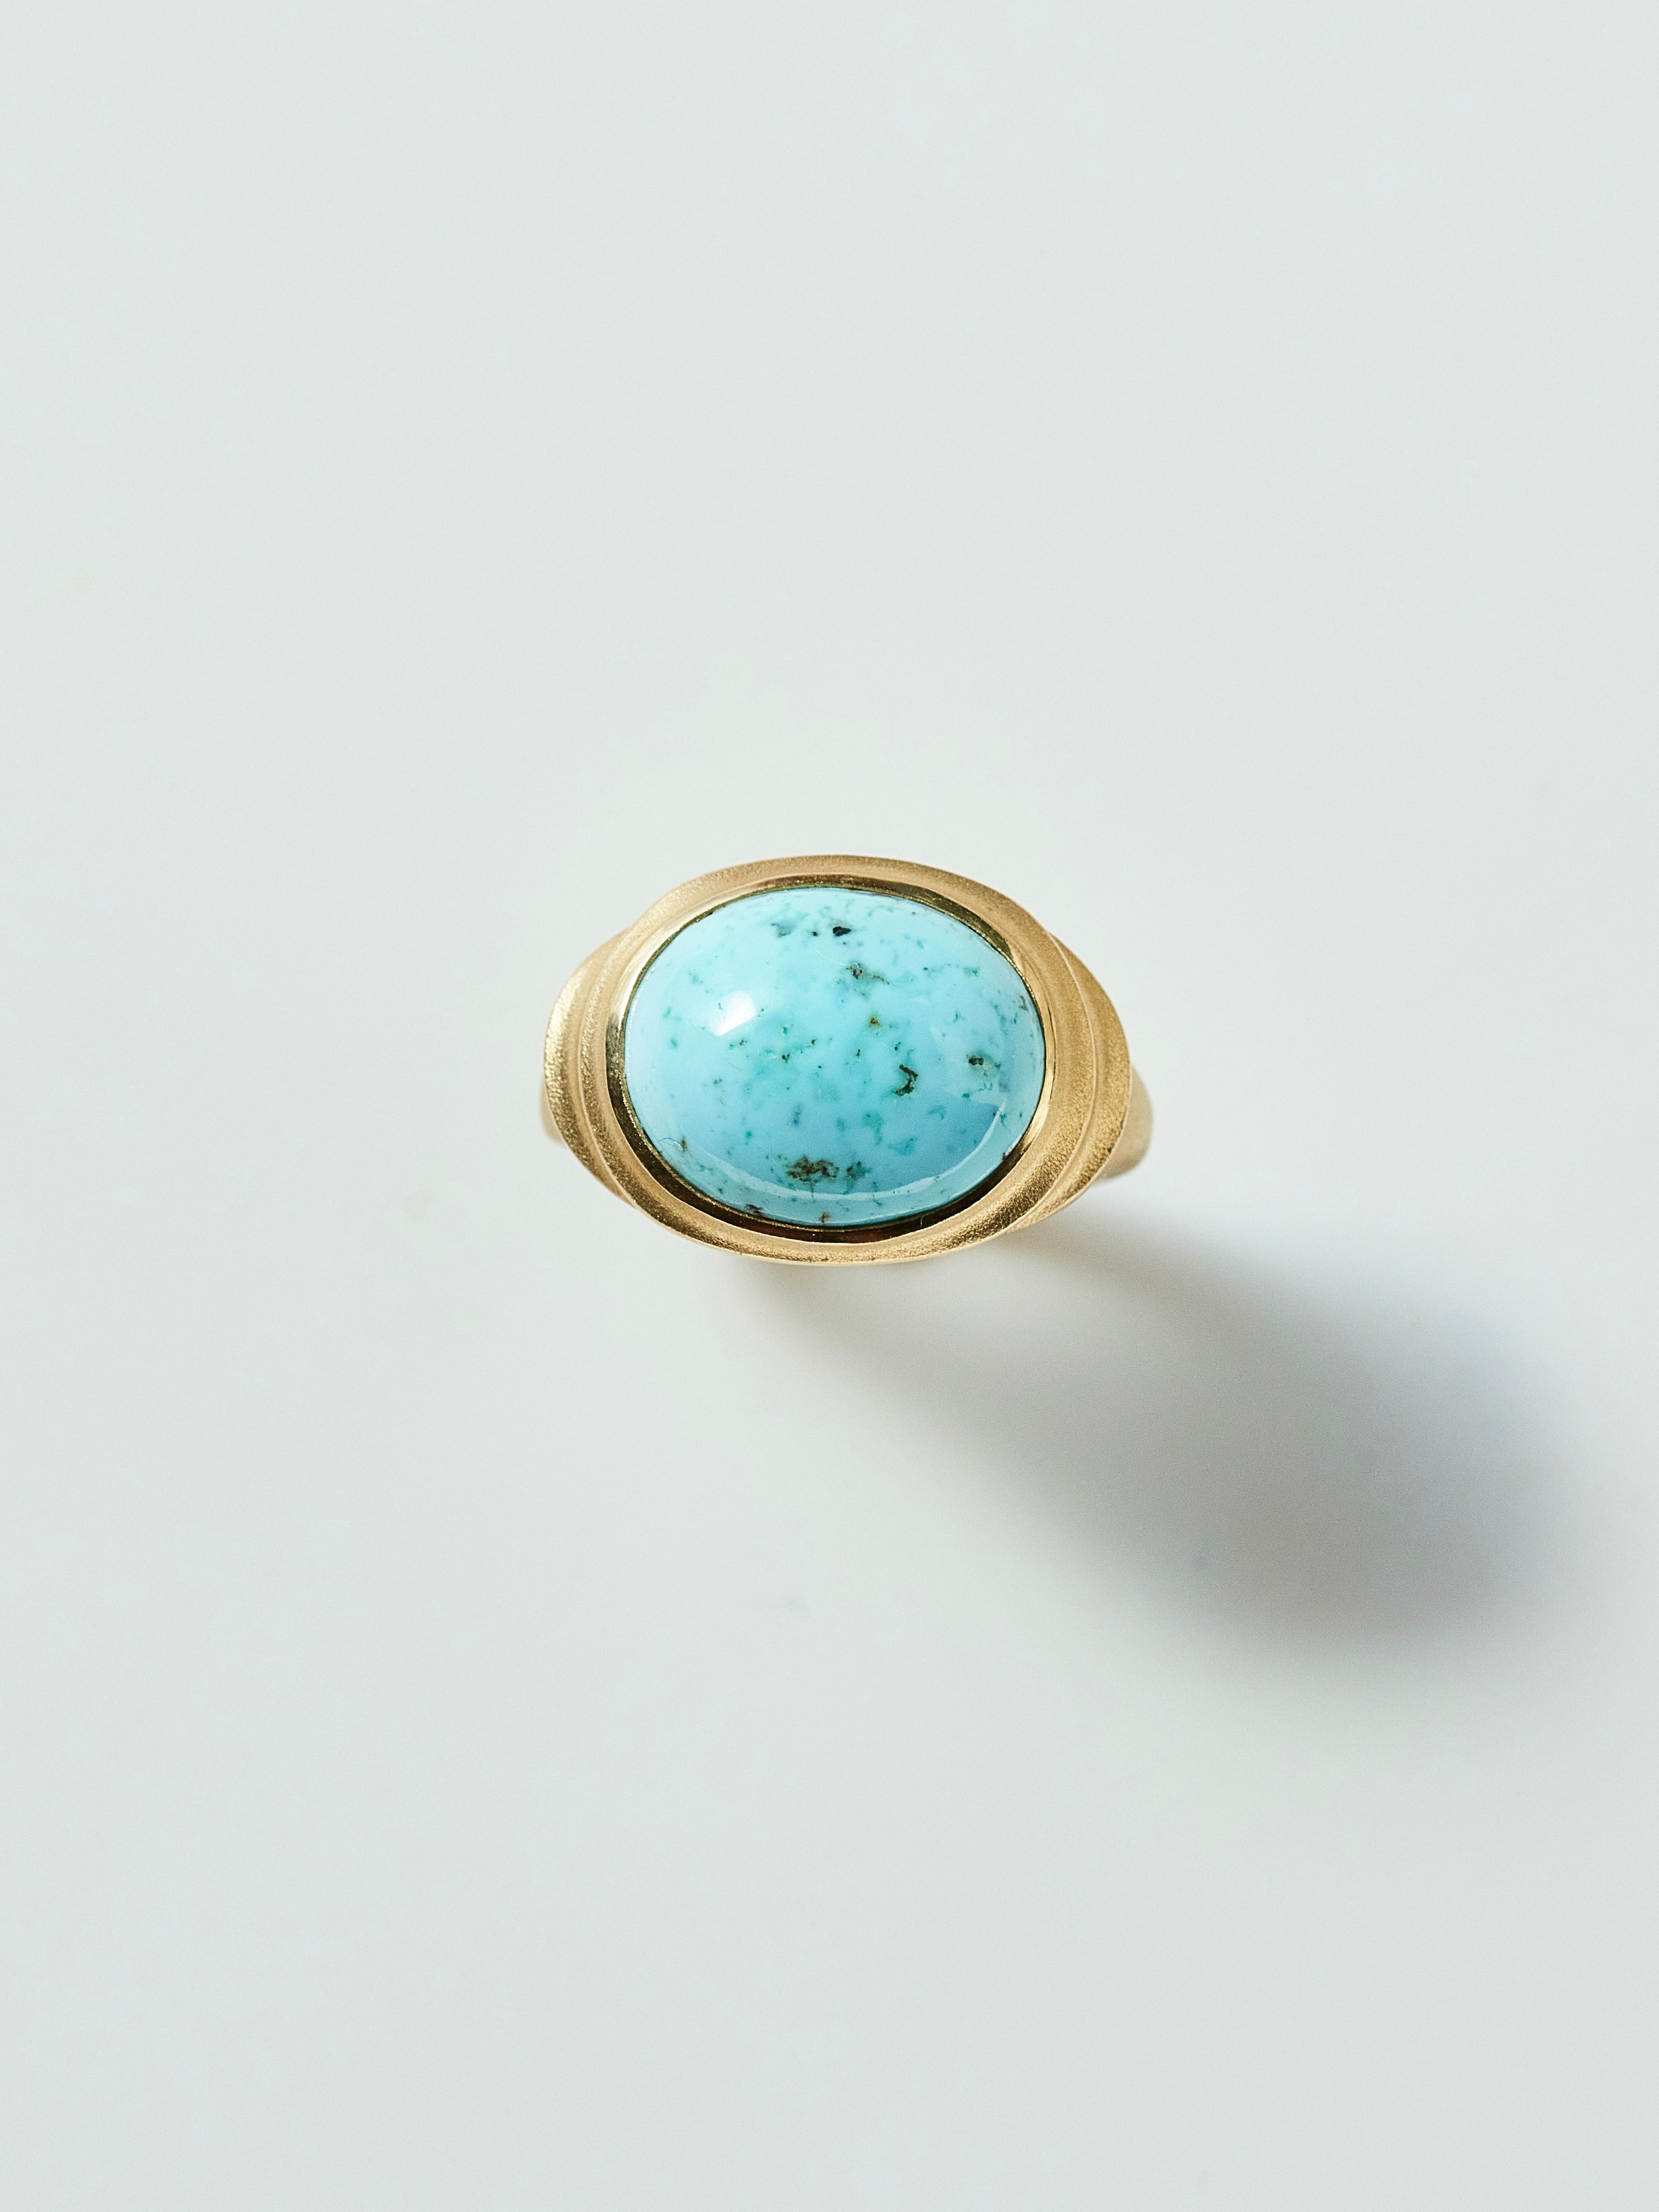 Turquoise Màre Ring in 18k Yellow Gold, Size 5.5